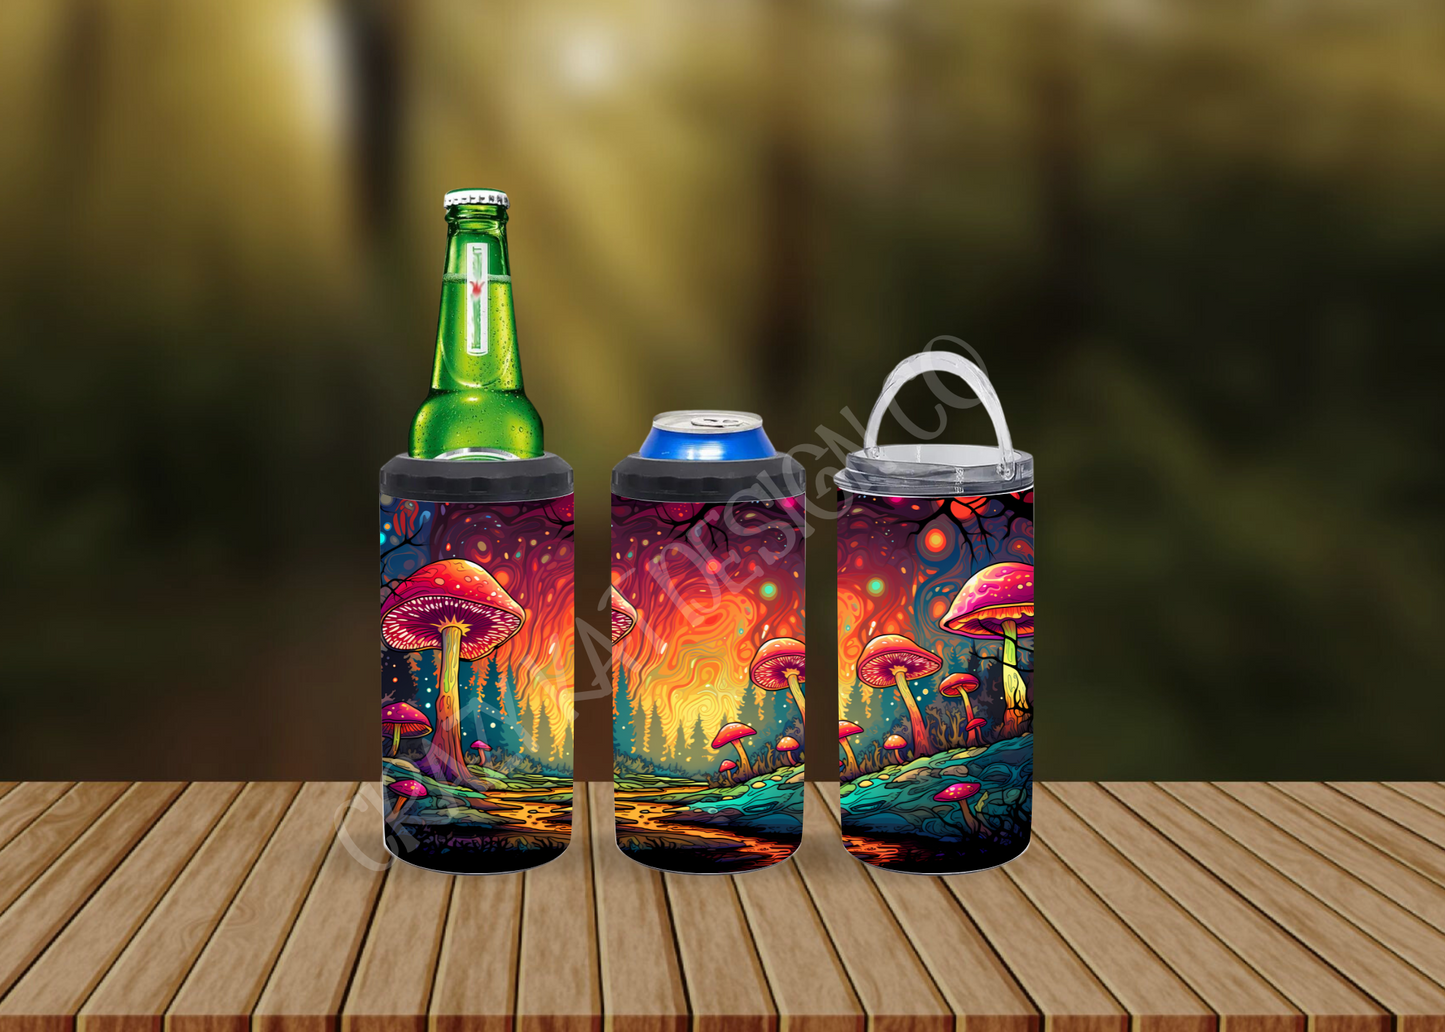 CUSTOMIZABLE MUSHROOM FORREST SUNSET HOT AND COLD TUMBLERS